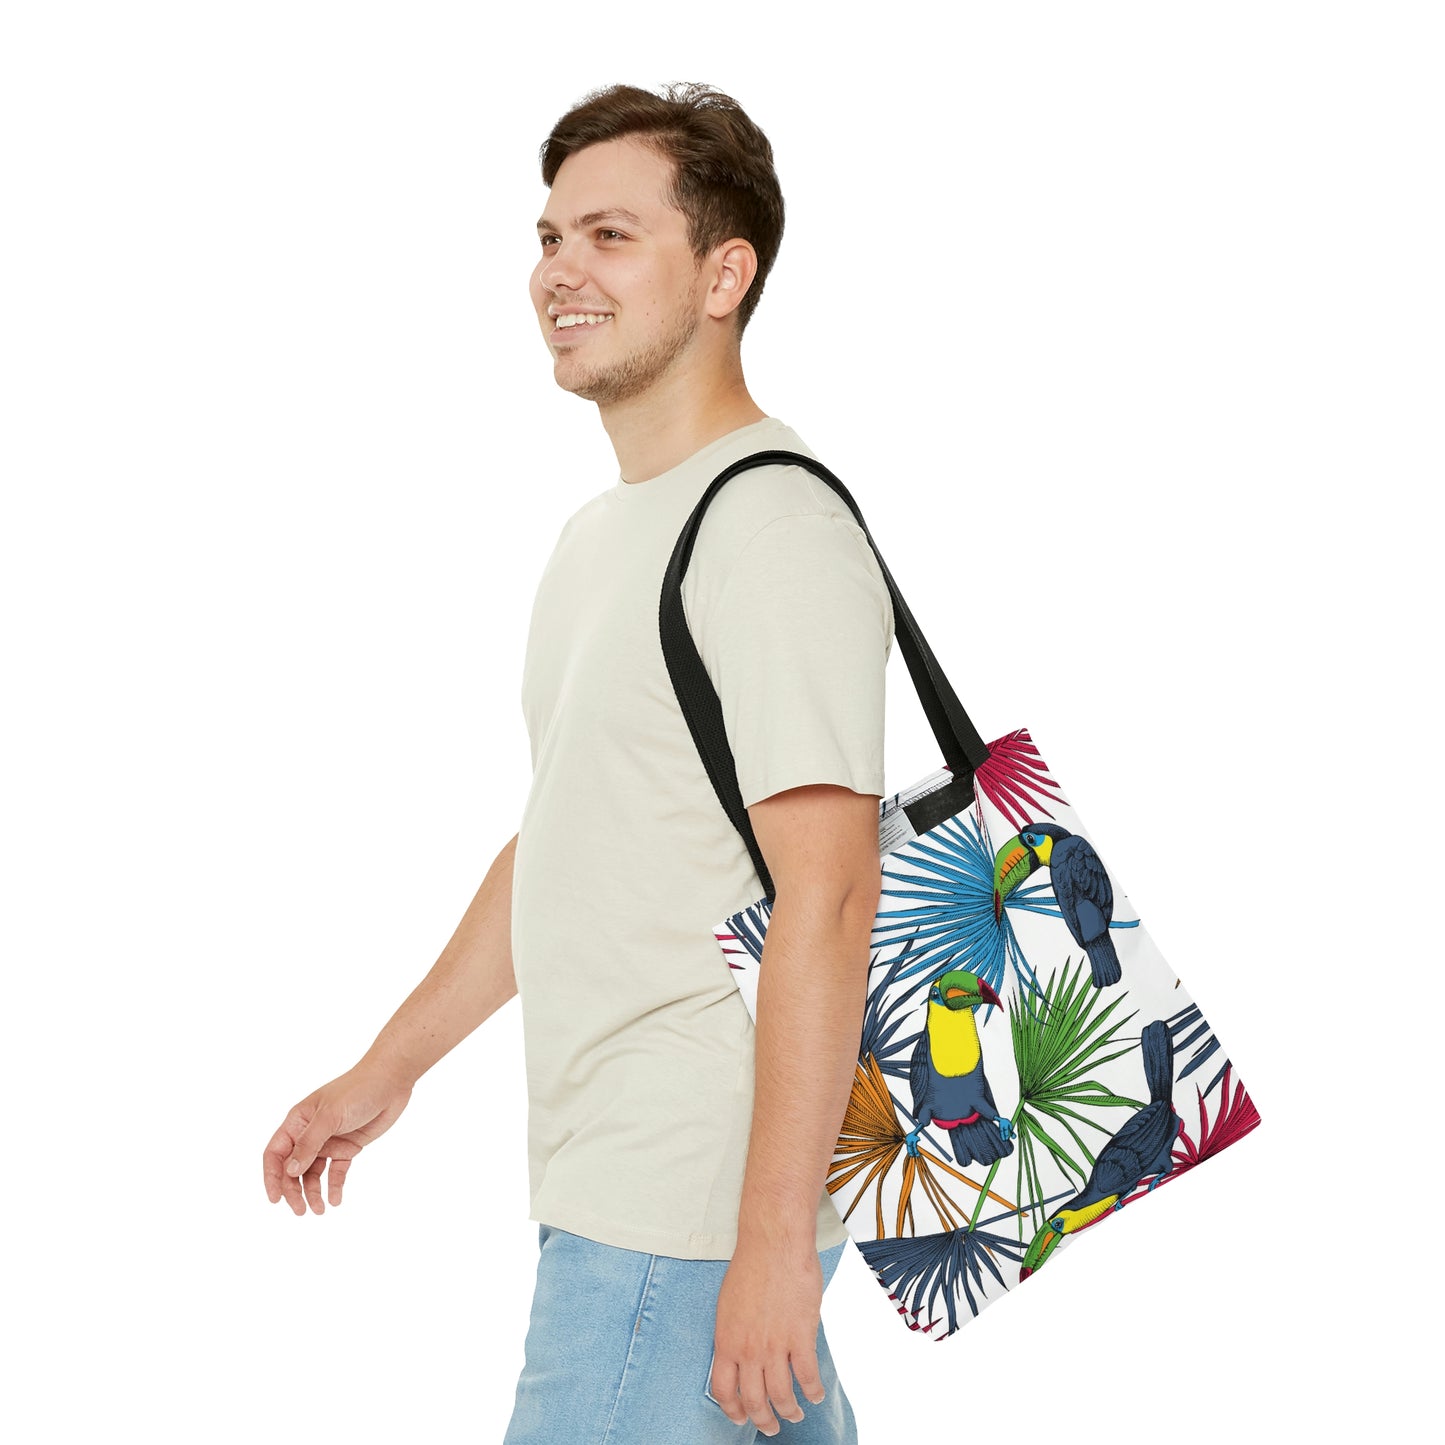 AOP Tote Bag "Tropical leaves, palm and Toucan birds"